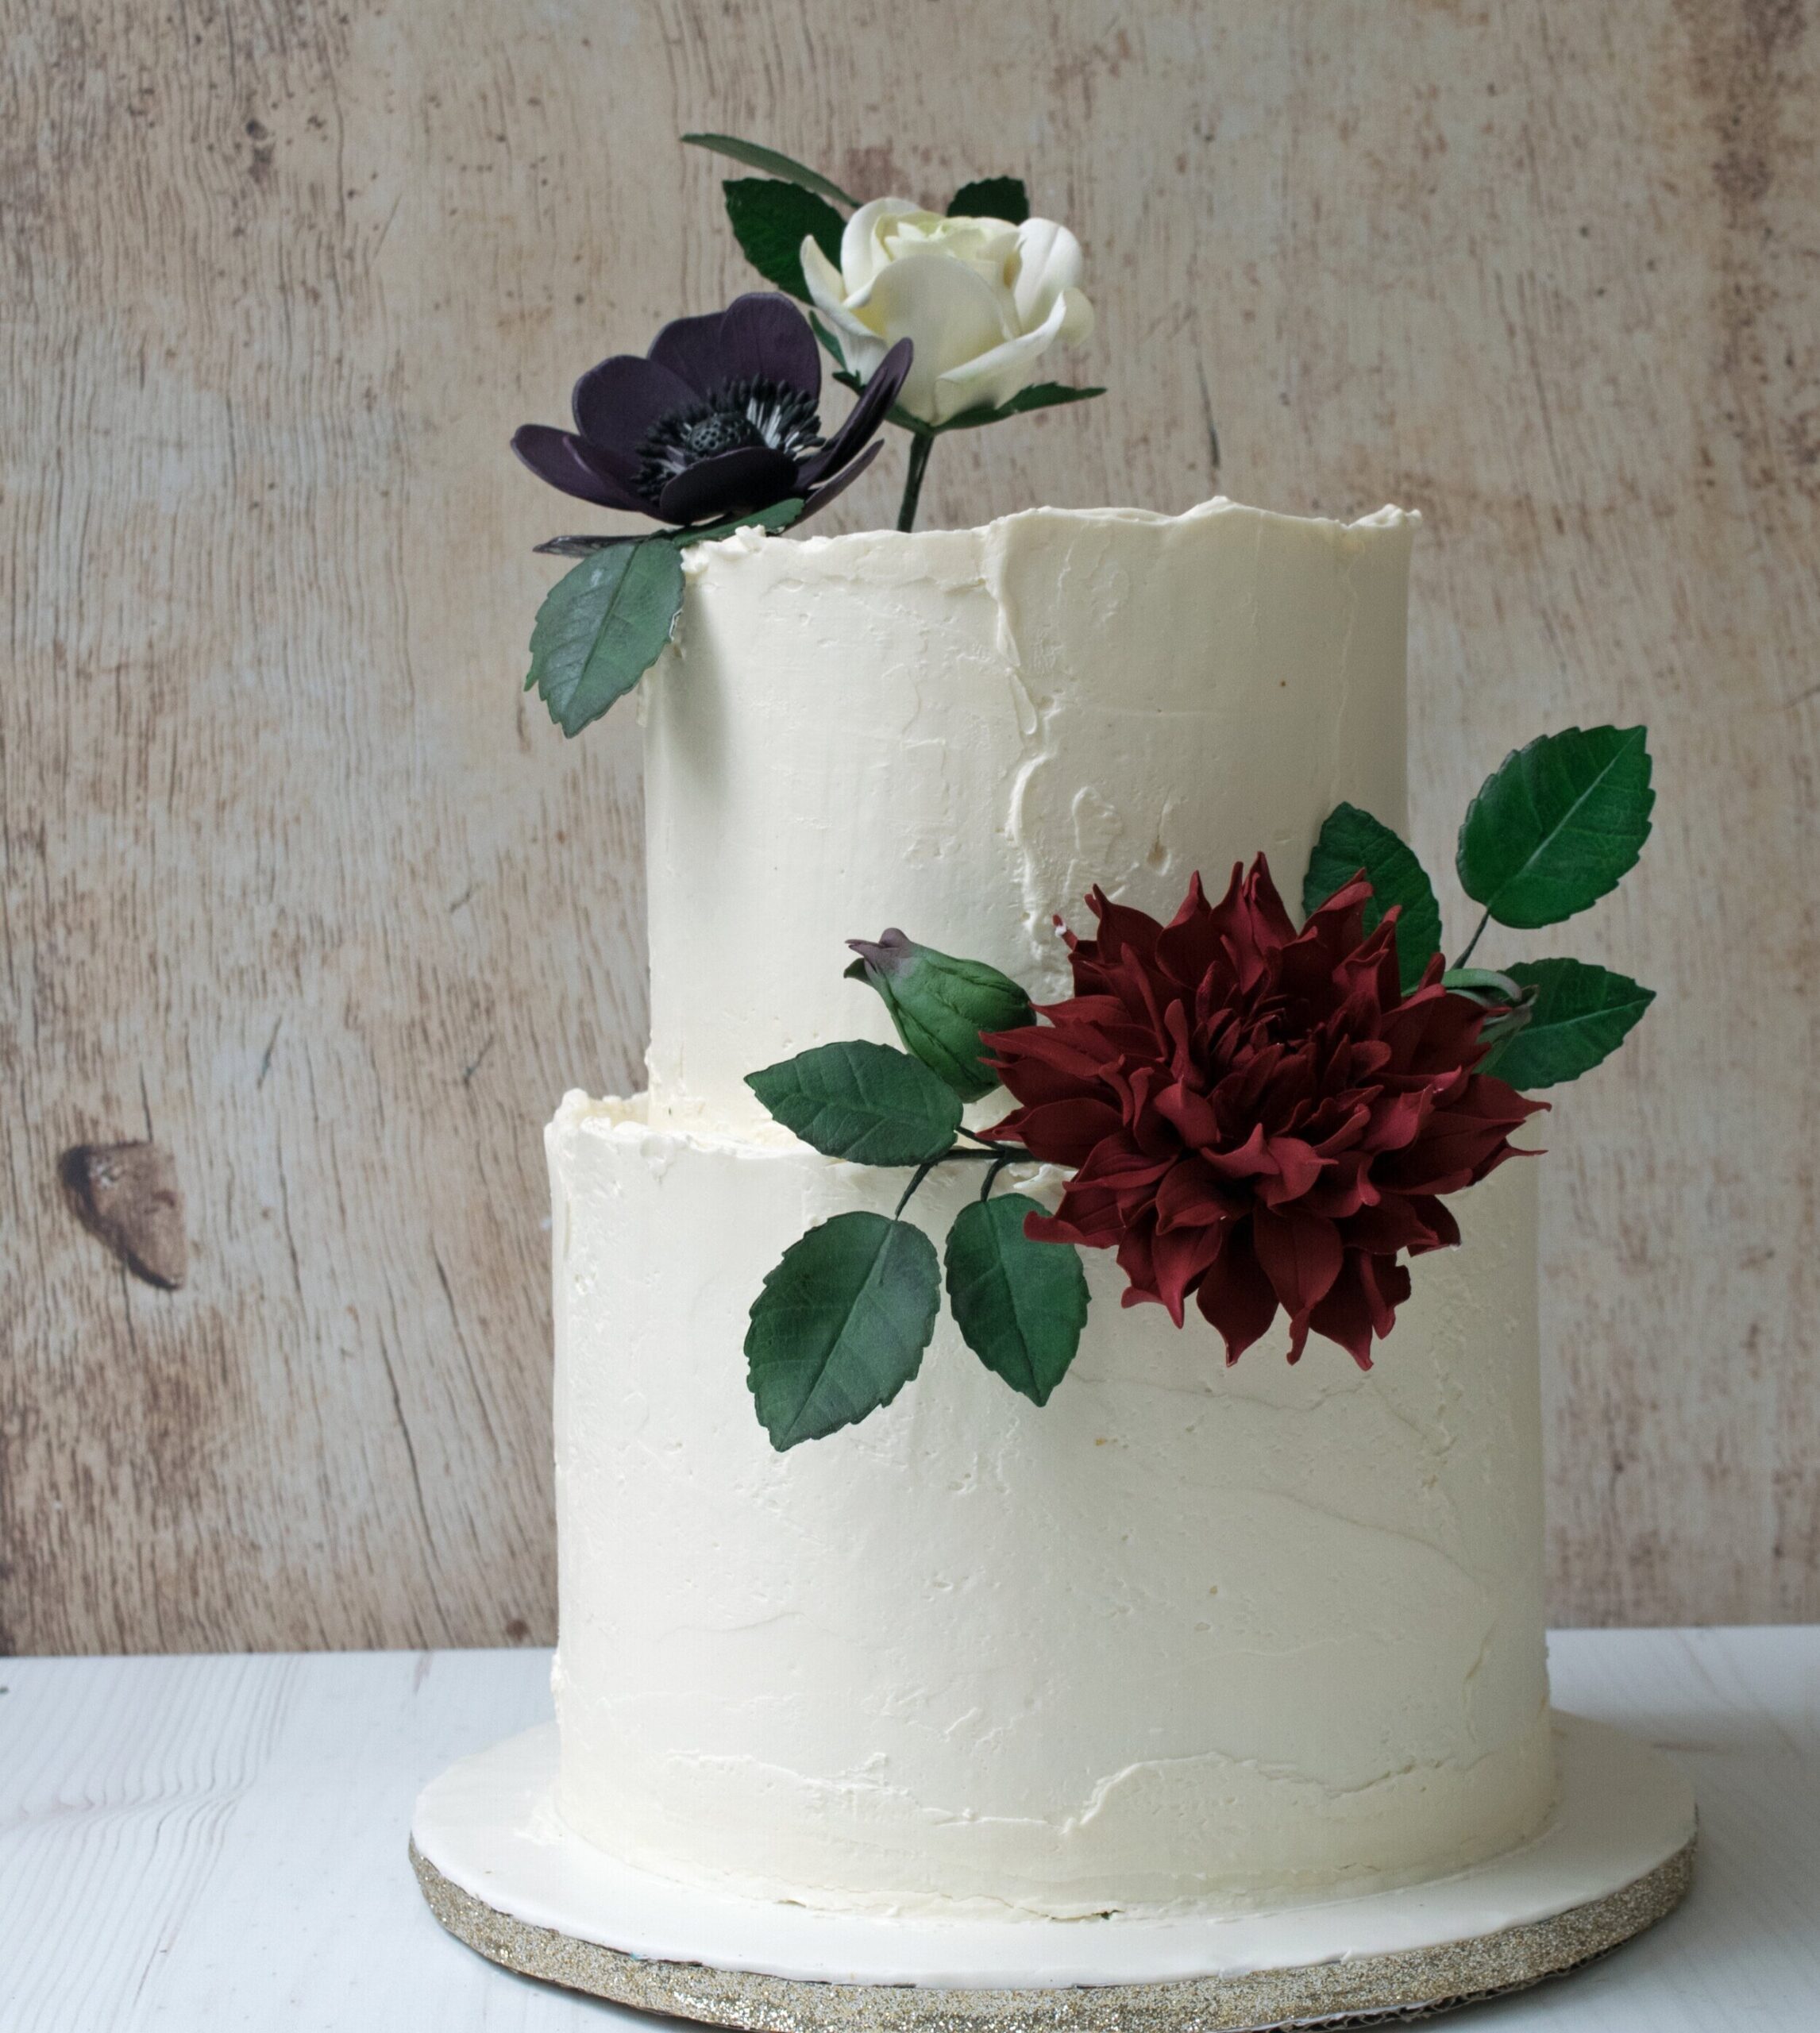 two tier cake decorated with burgundy dalia, purple anemone, and white rose as an alternative to using fresh flowers for cakes